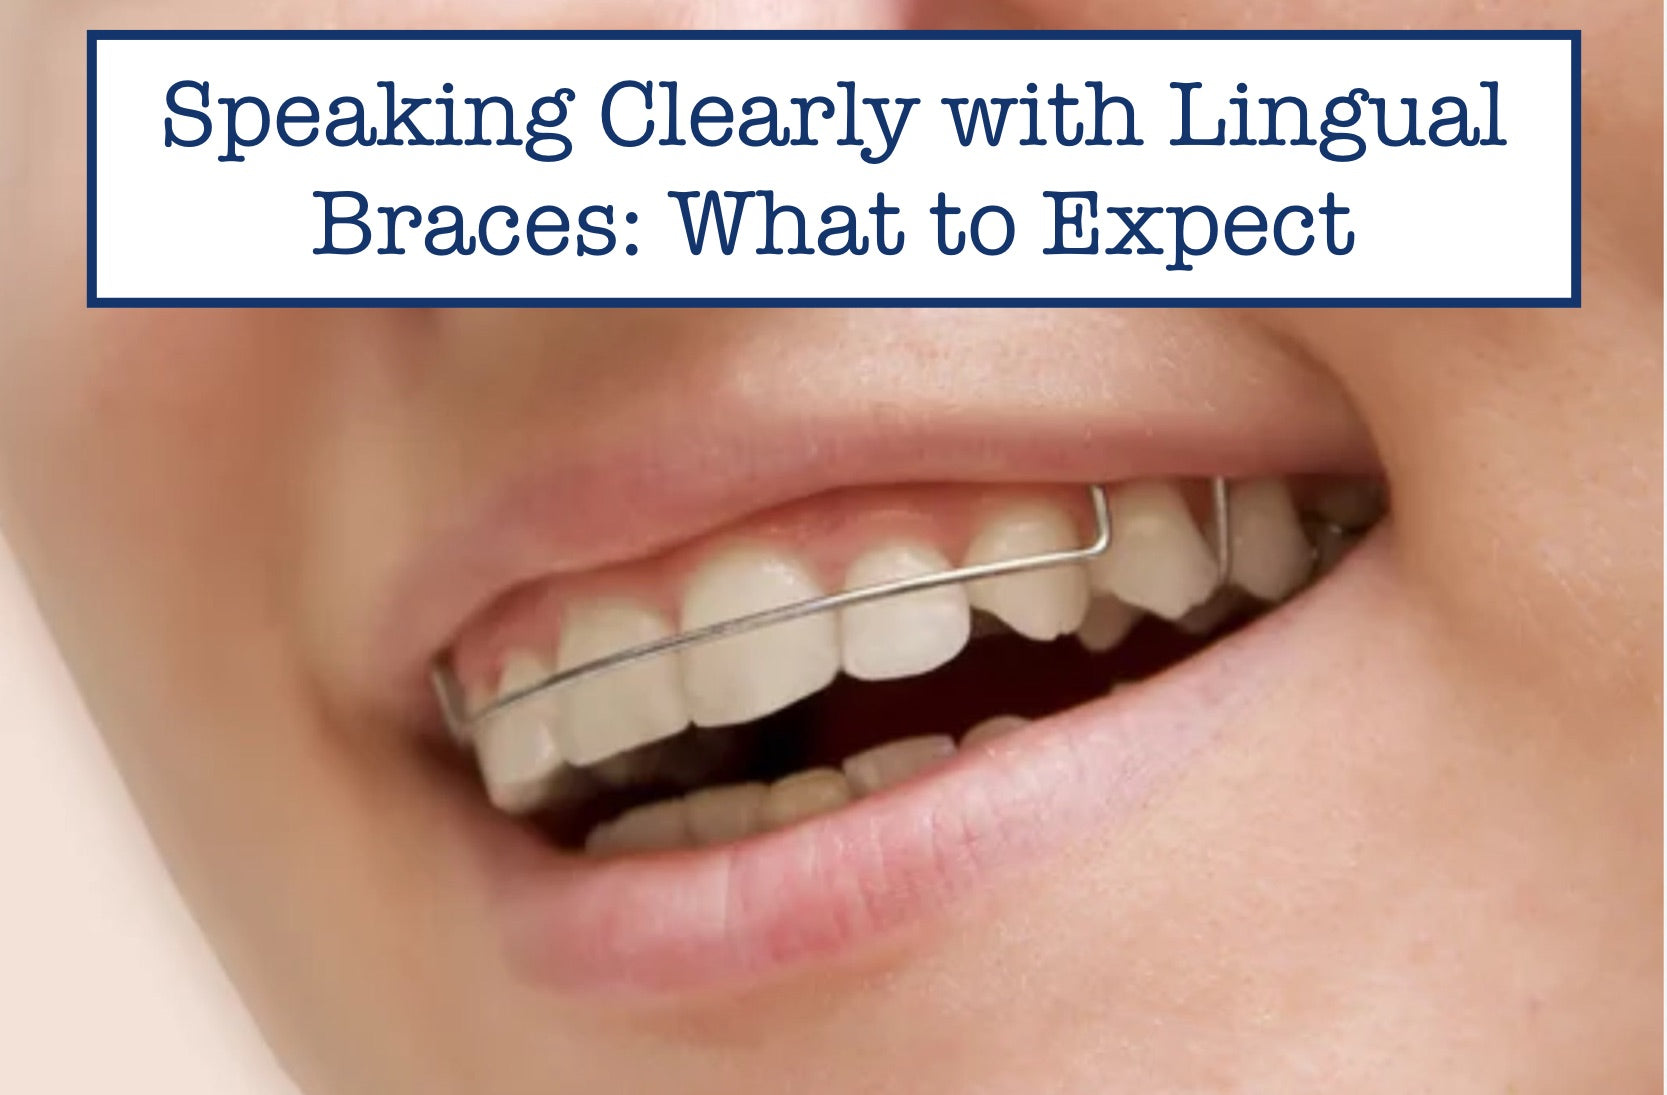 Speaking Clearly with Lingual Braces: What to Expect